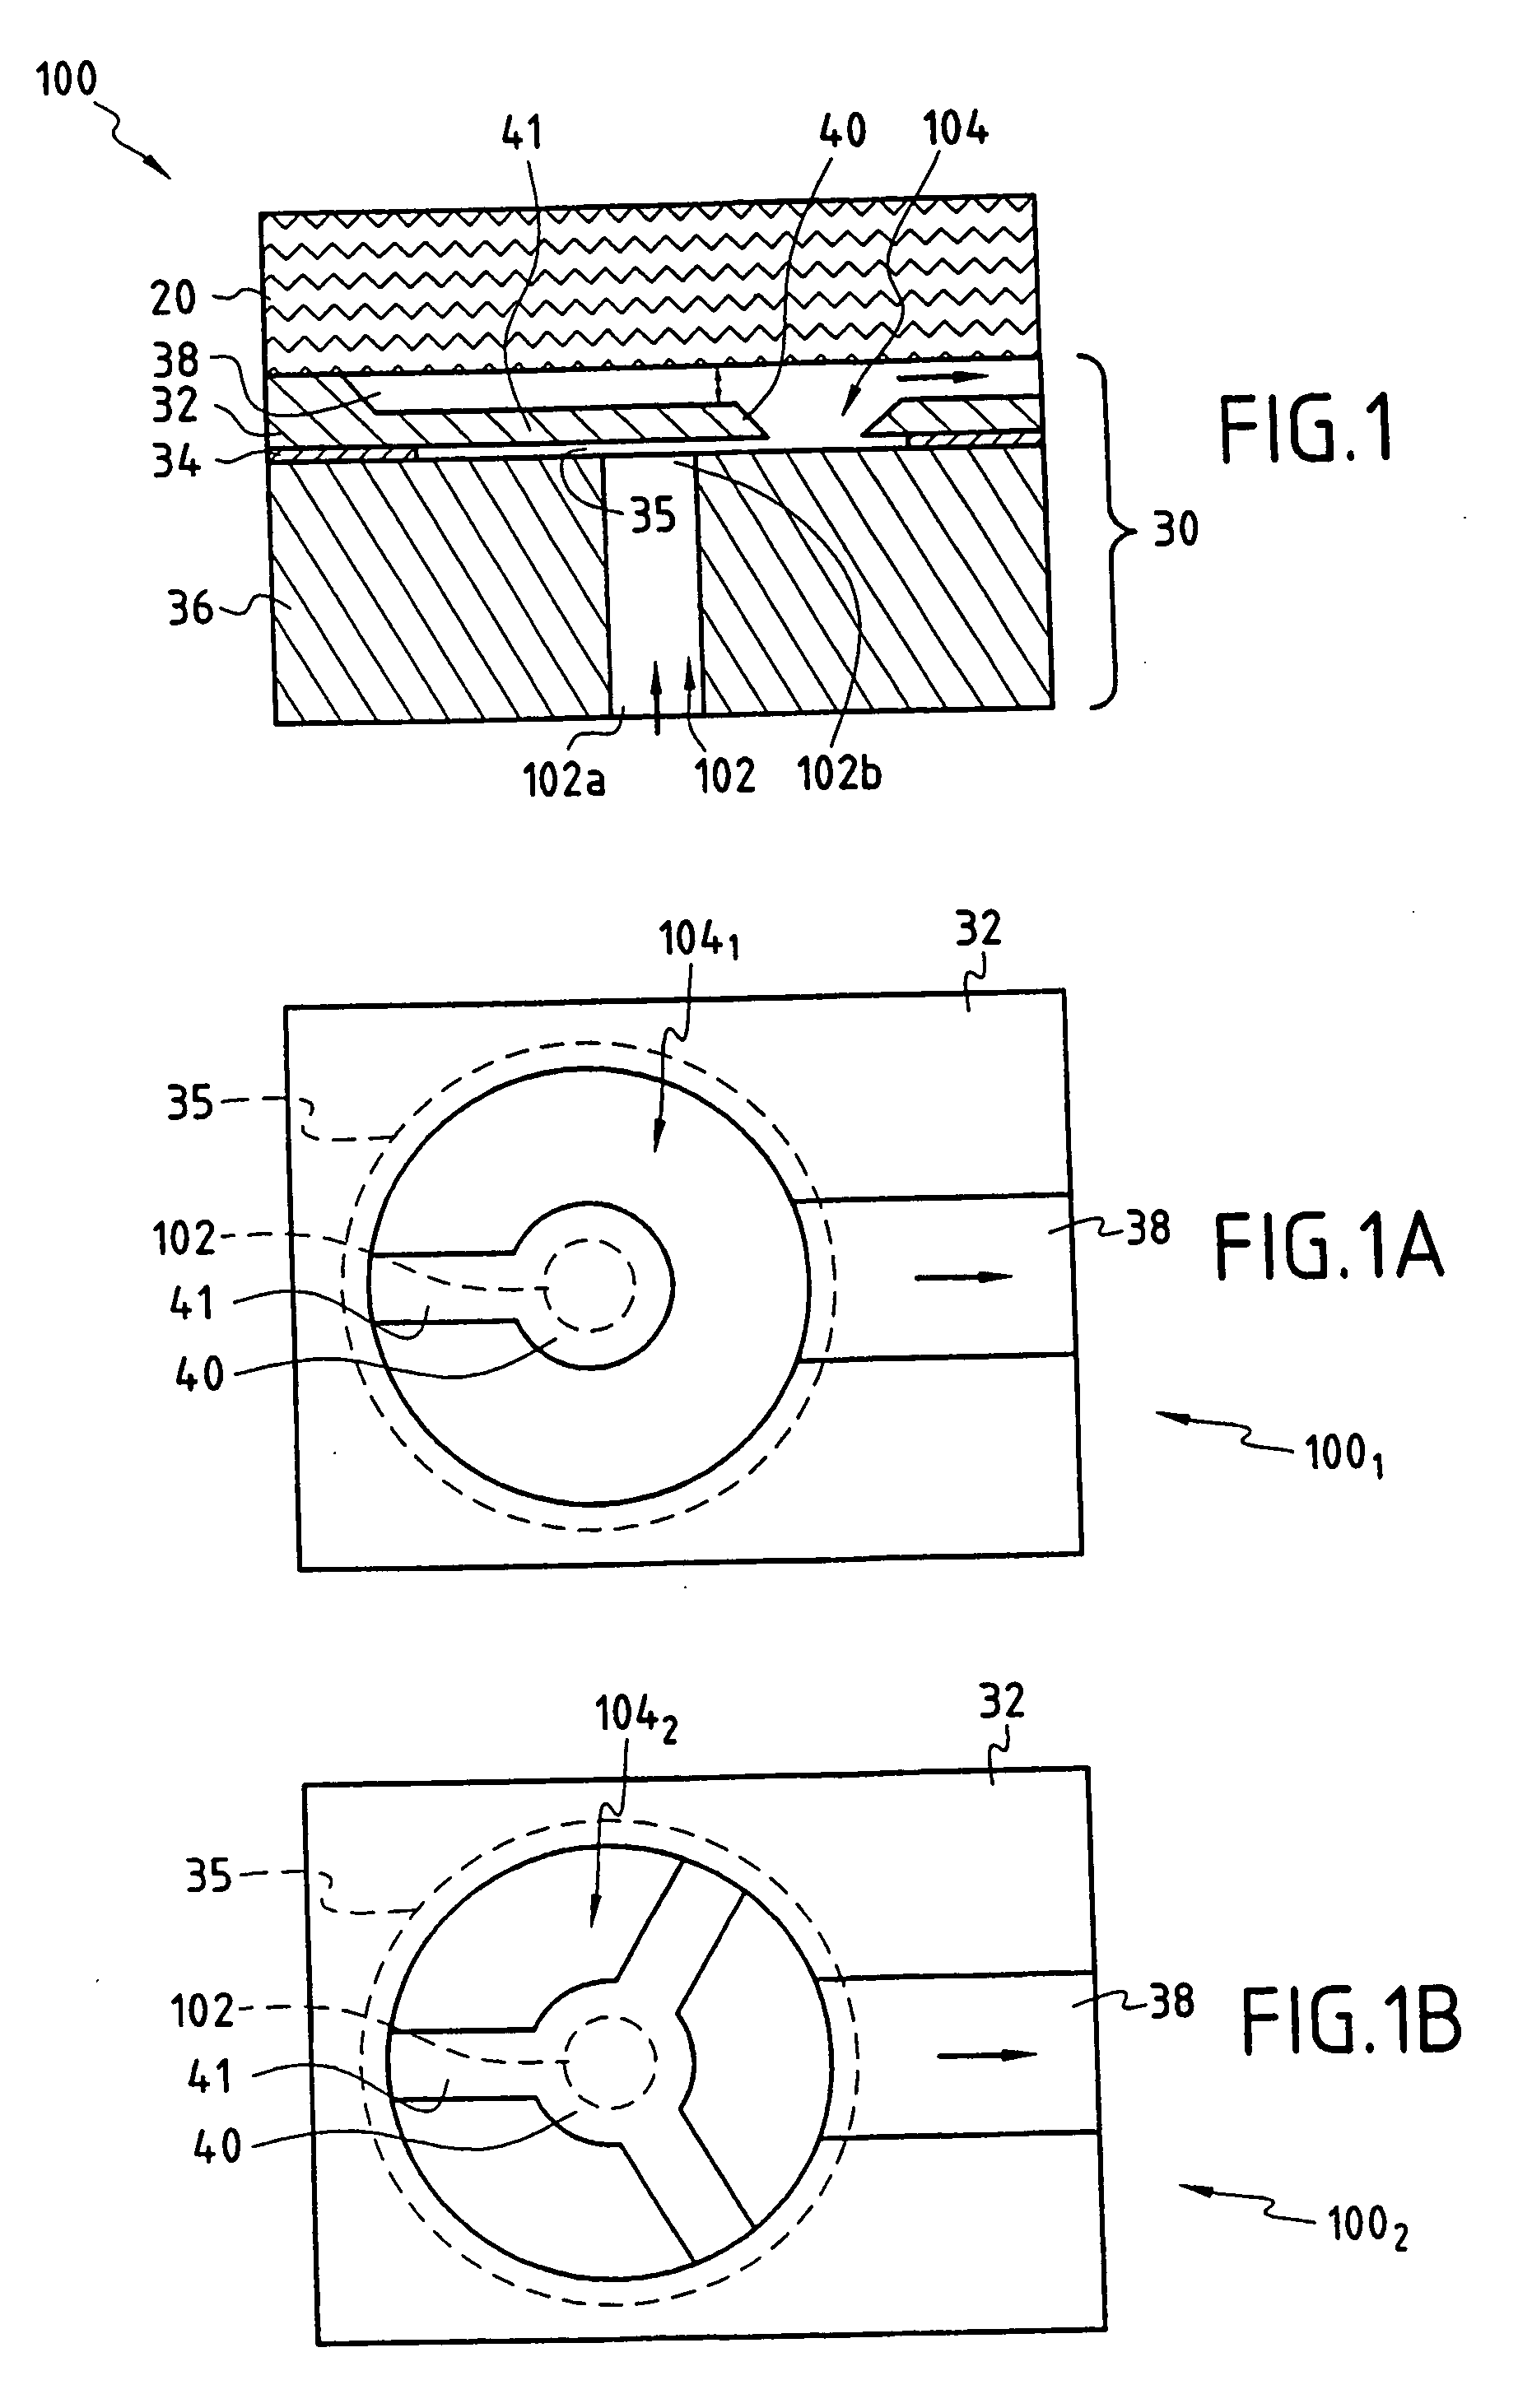 Micromachined fluidic device and method for making same